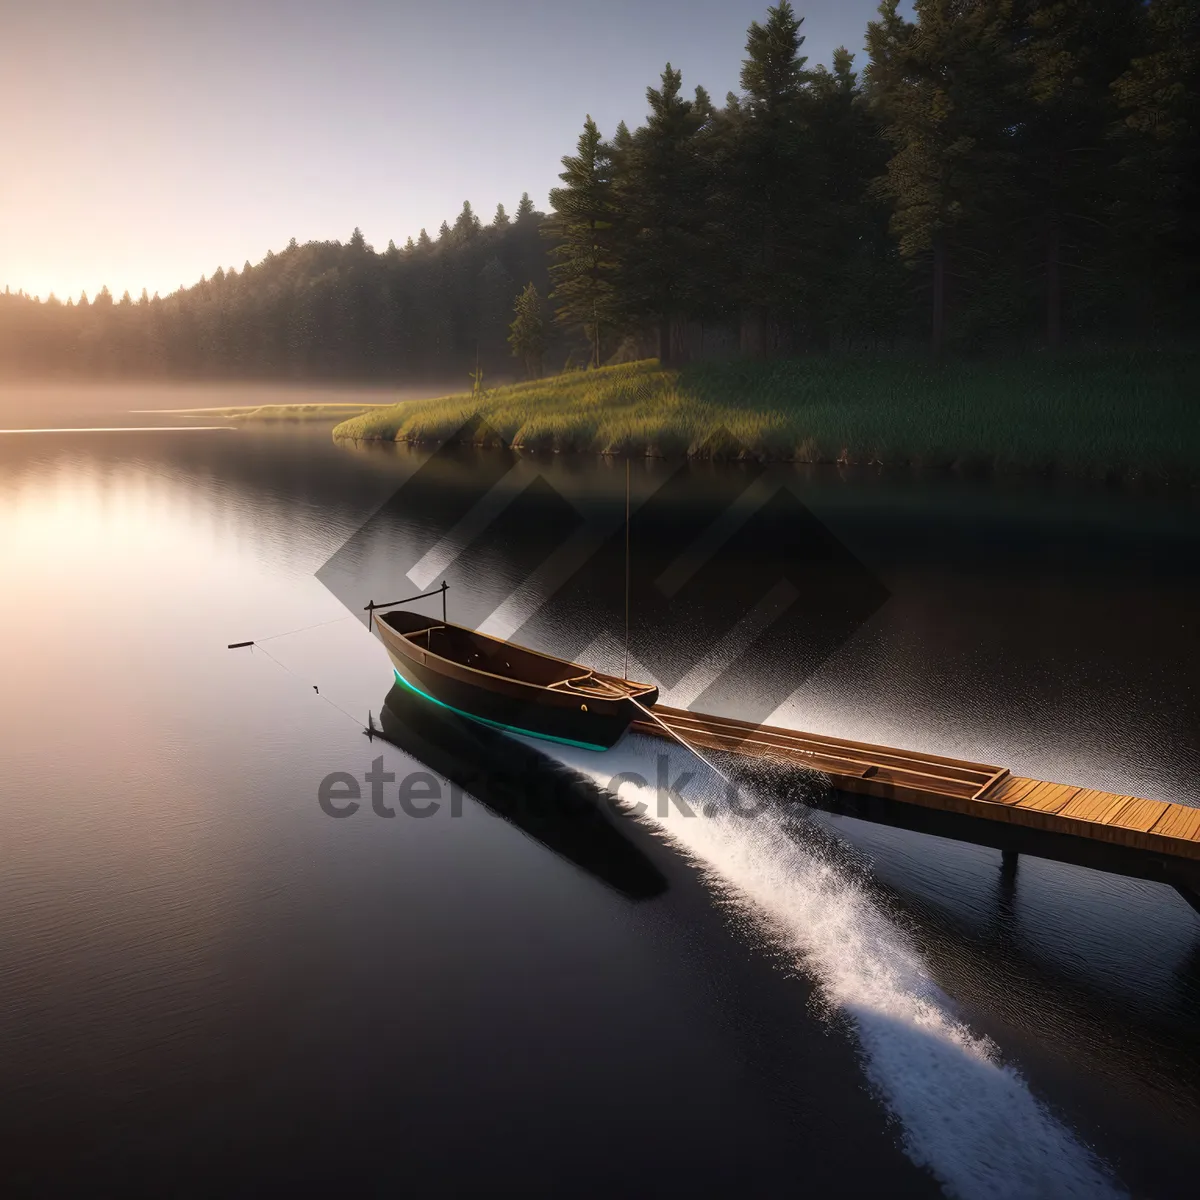 Picture of Serene Sunset: Kayak gliding on calm waters